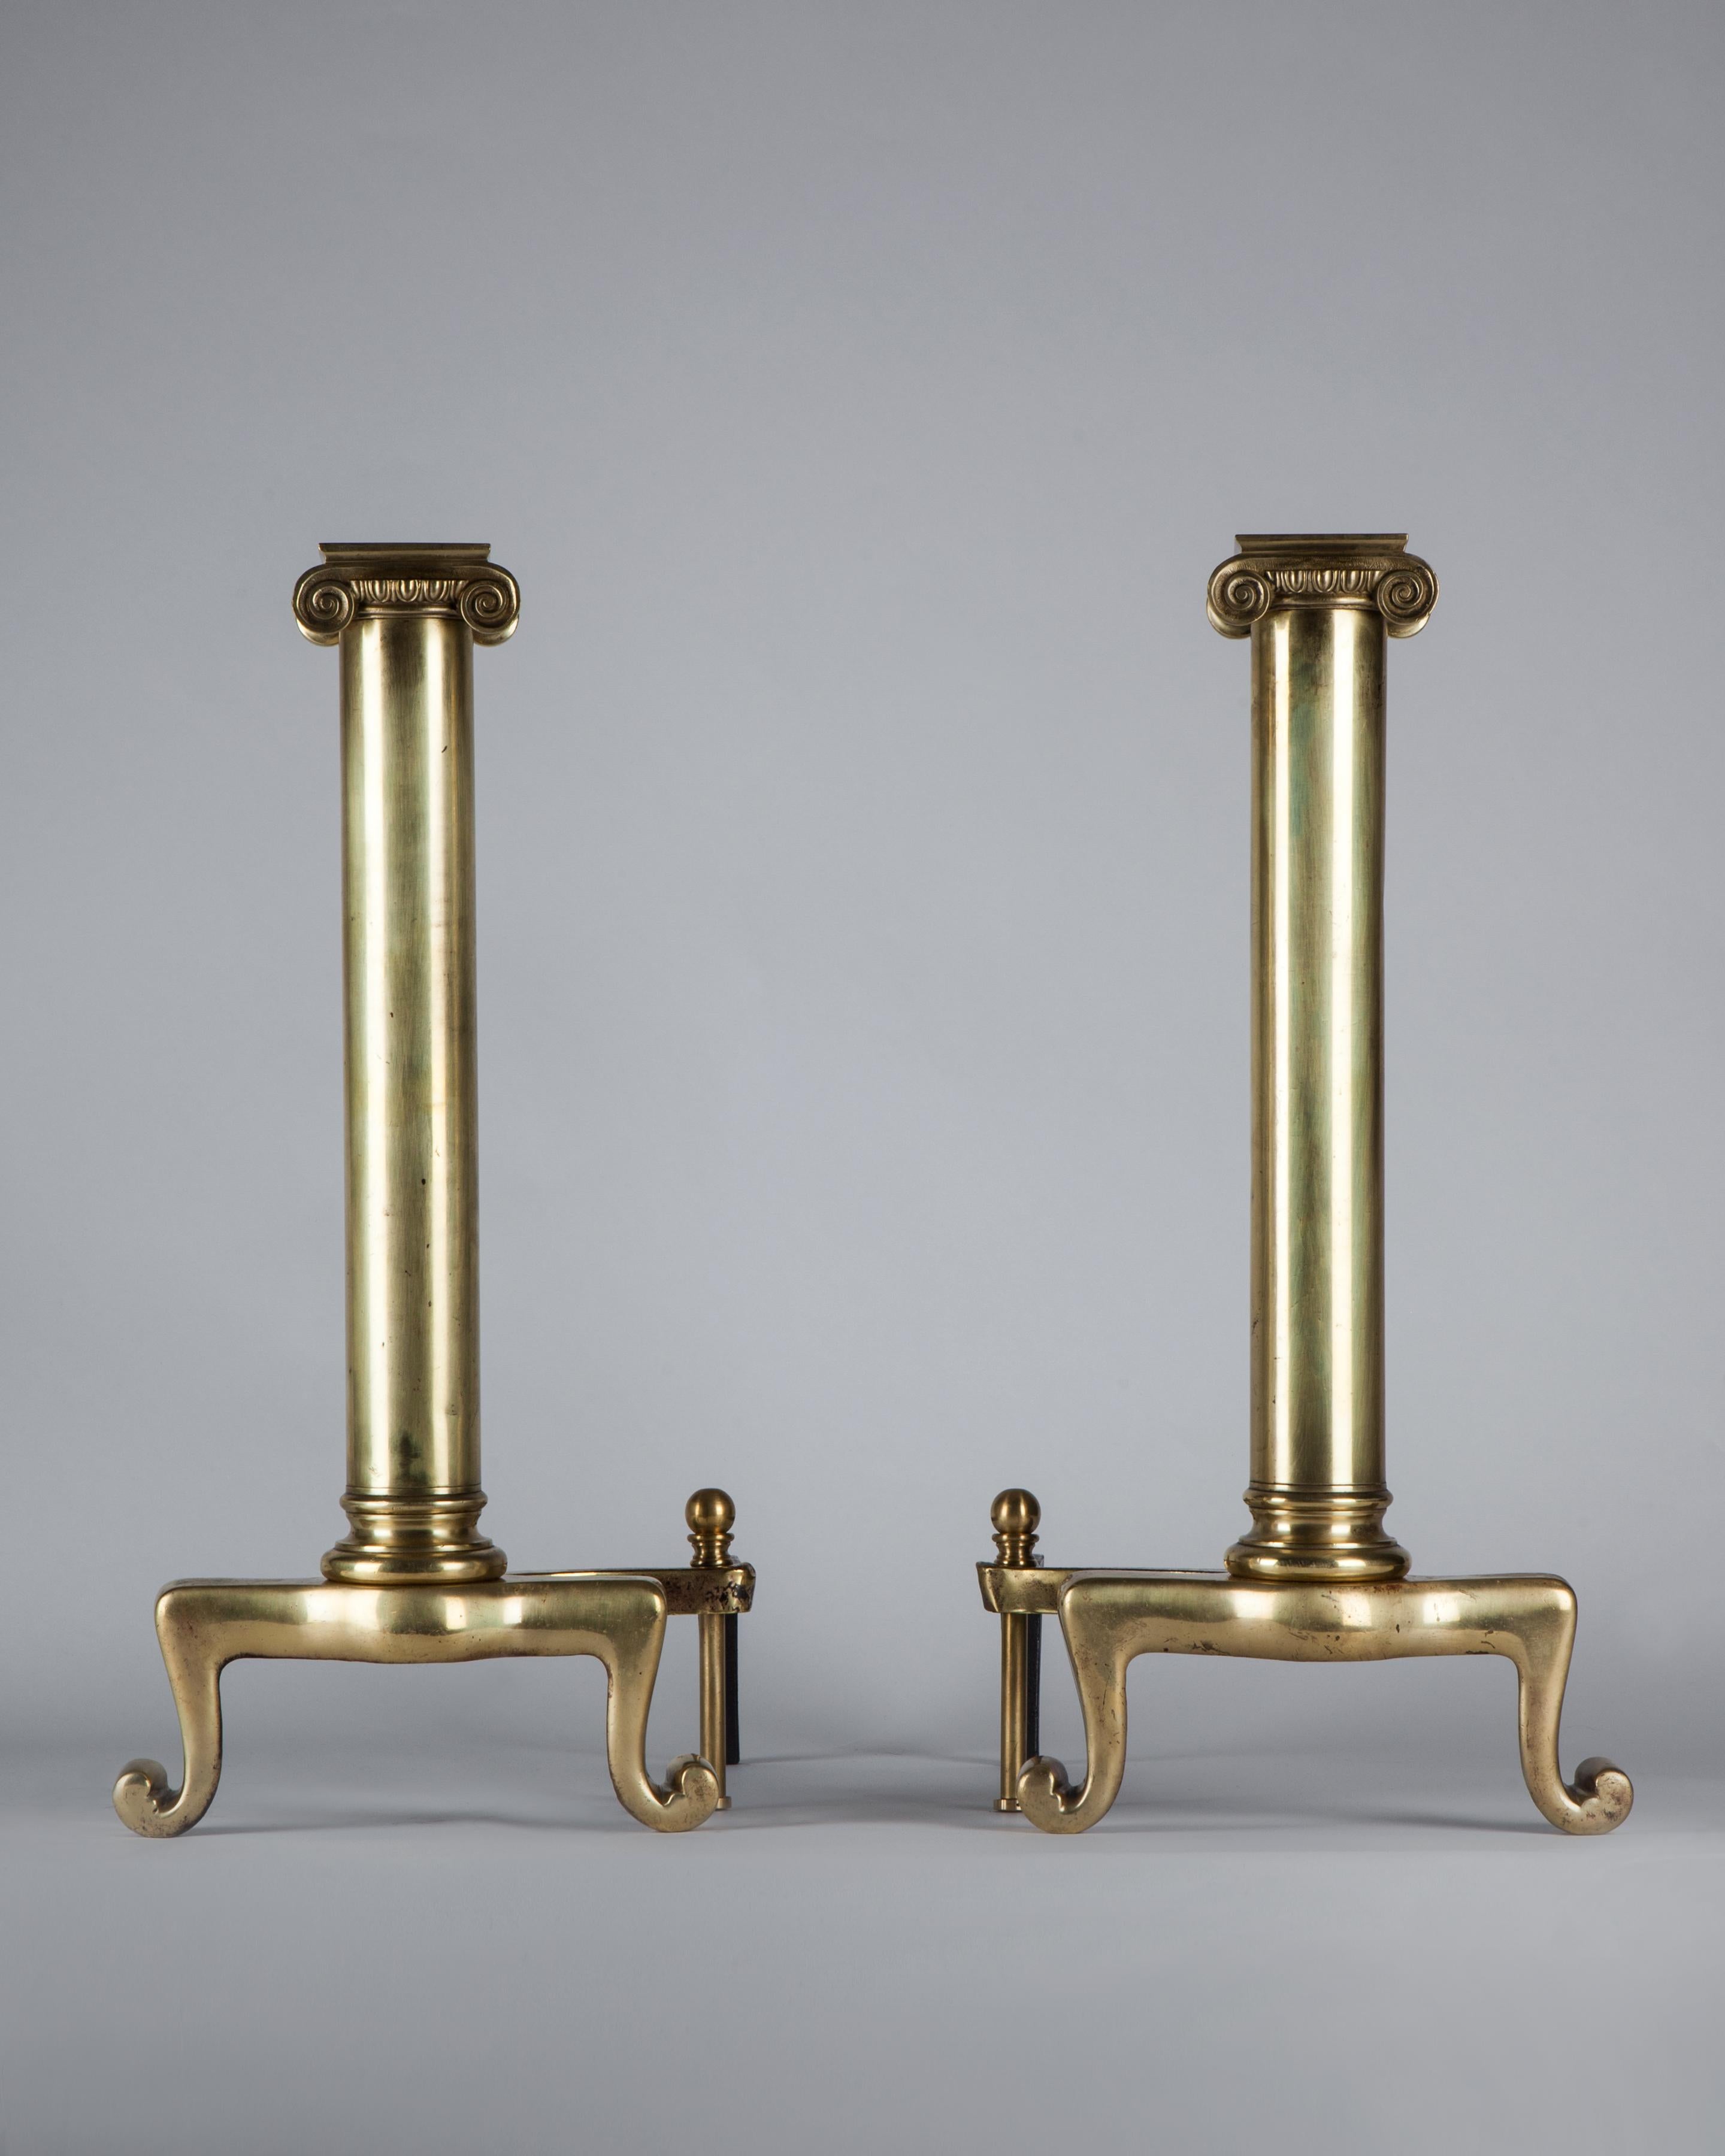 AFP0578
A pair of vintage brass Ionic column andirons with scroll feet in a mellow aged brass finish, circa 1900.

Dimensions:
Overall: 23-3/4